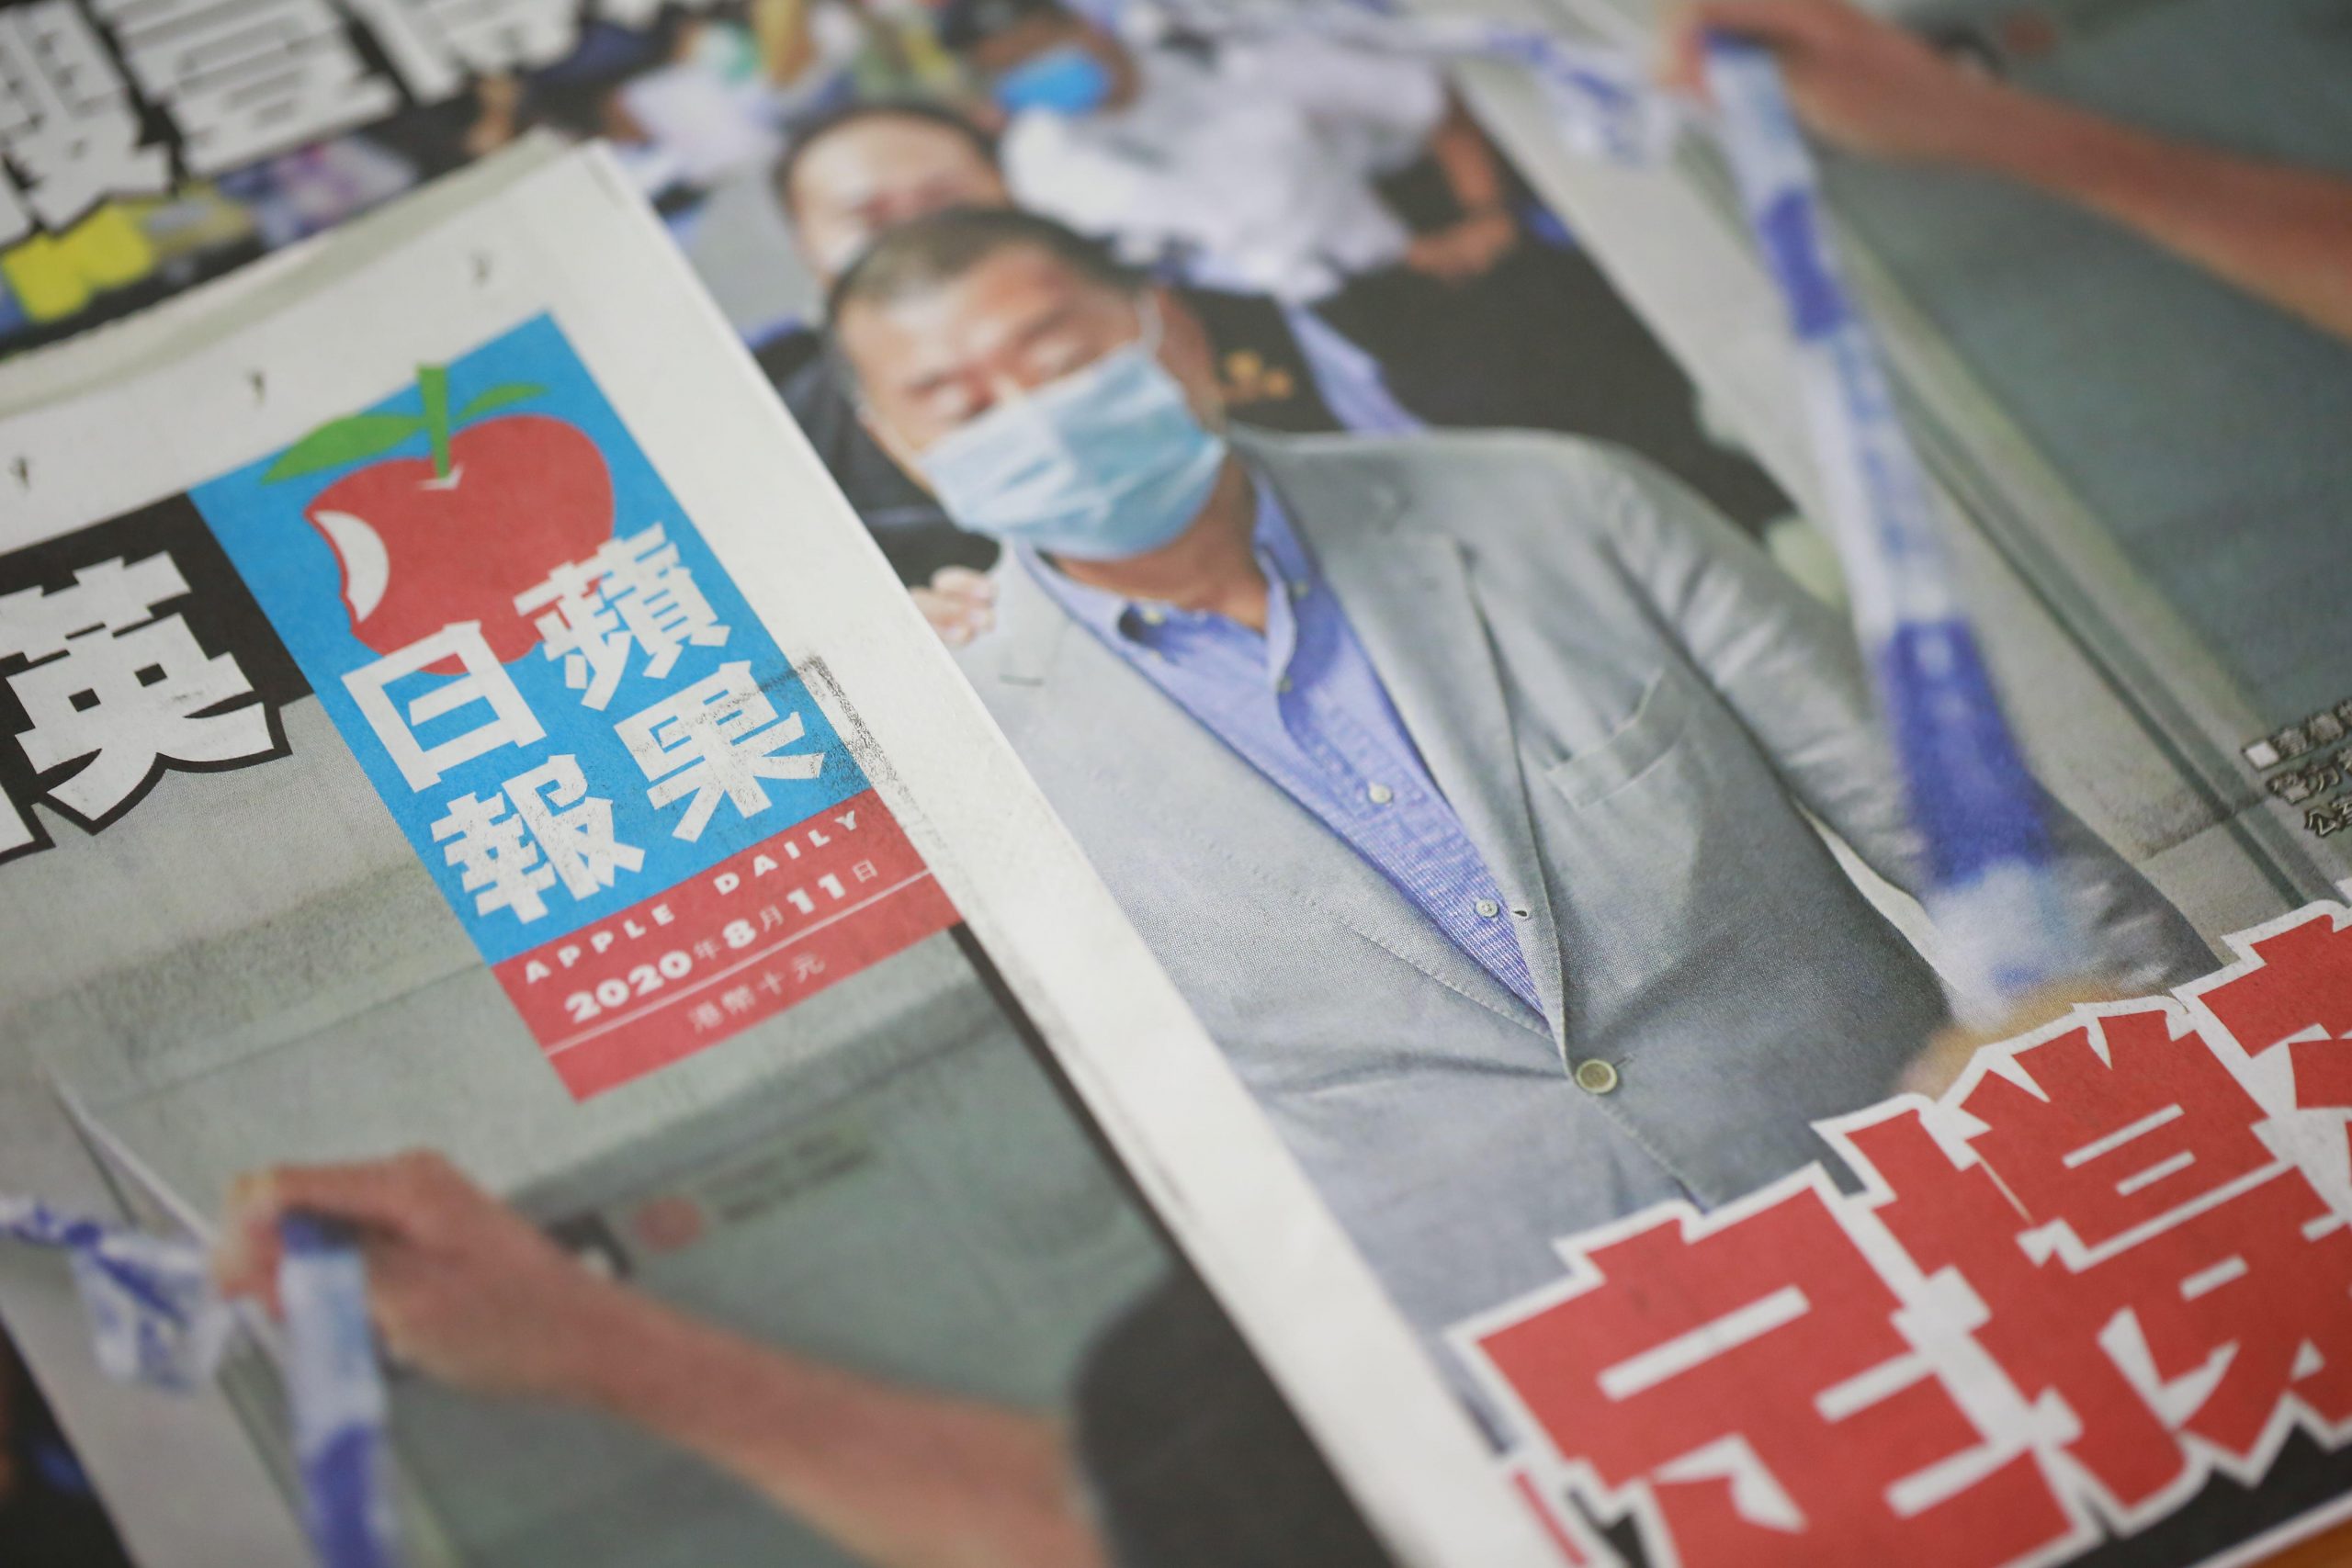 As Apple Daily looks set to close down, speech crime comes to Hong Kong